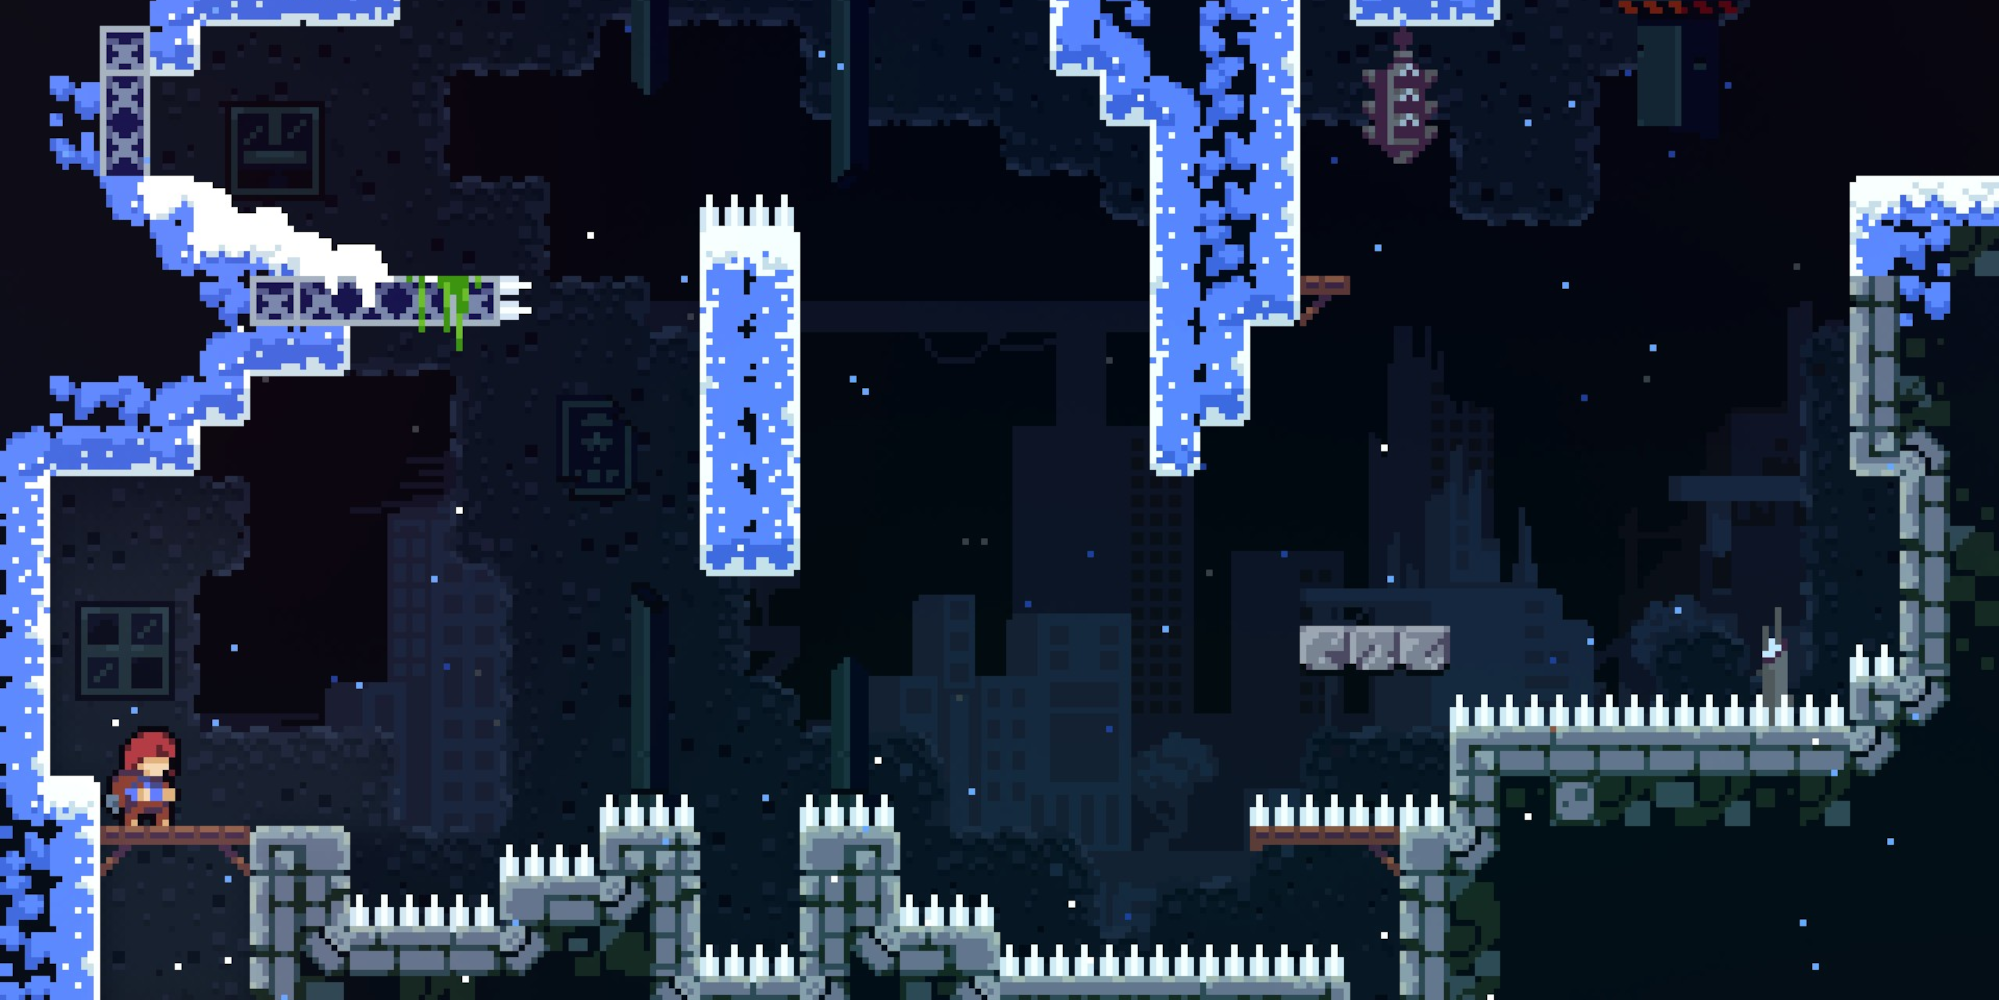 Celeste player in a level with multiple spiked traps